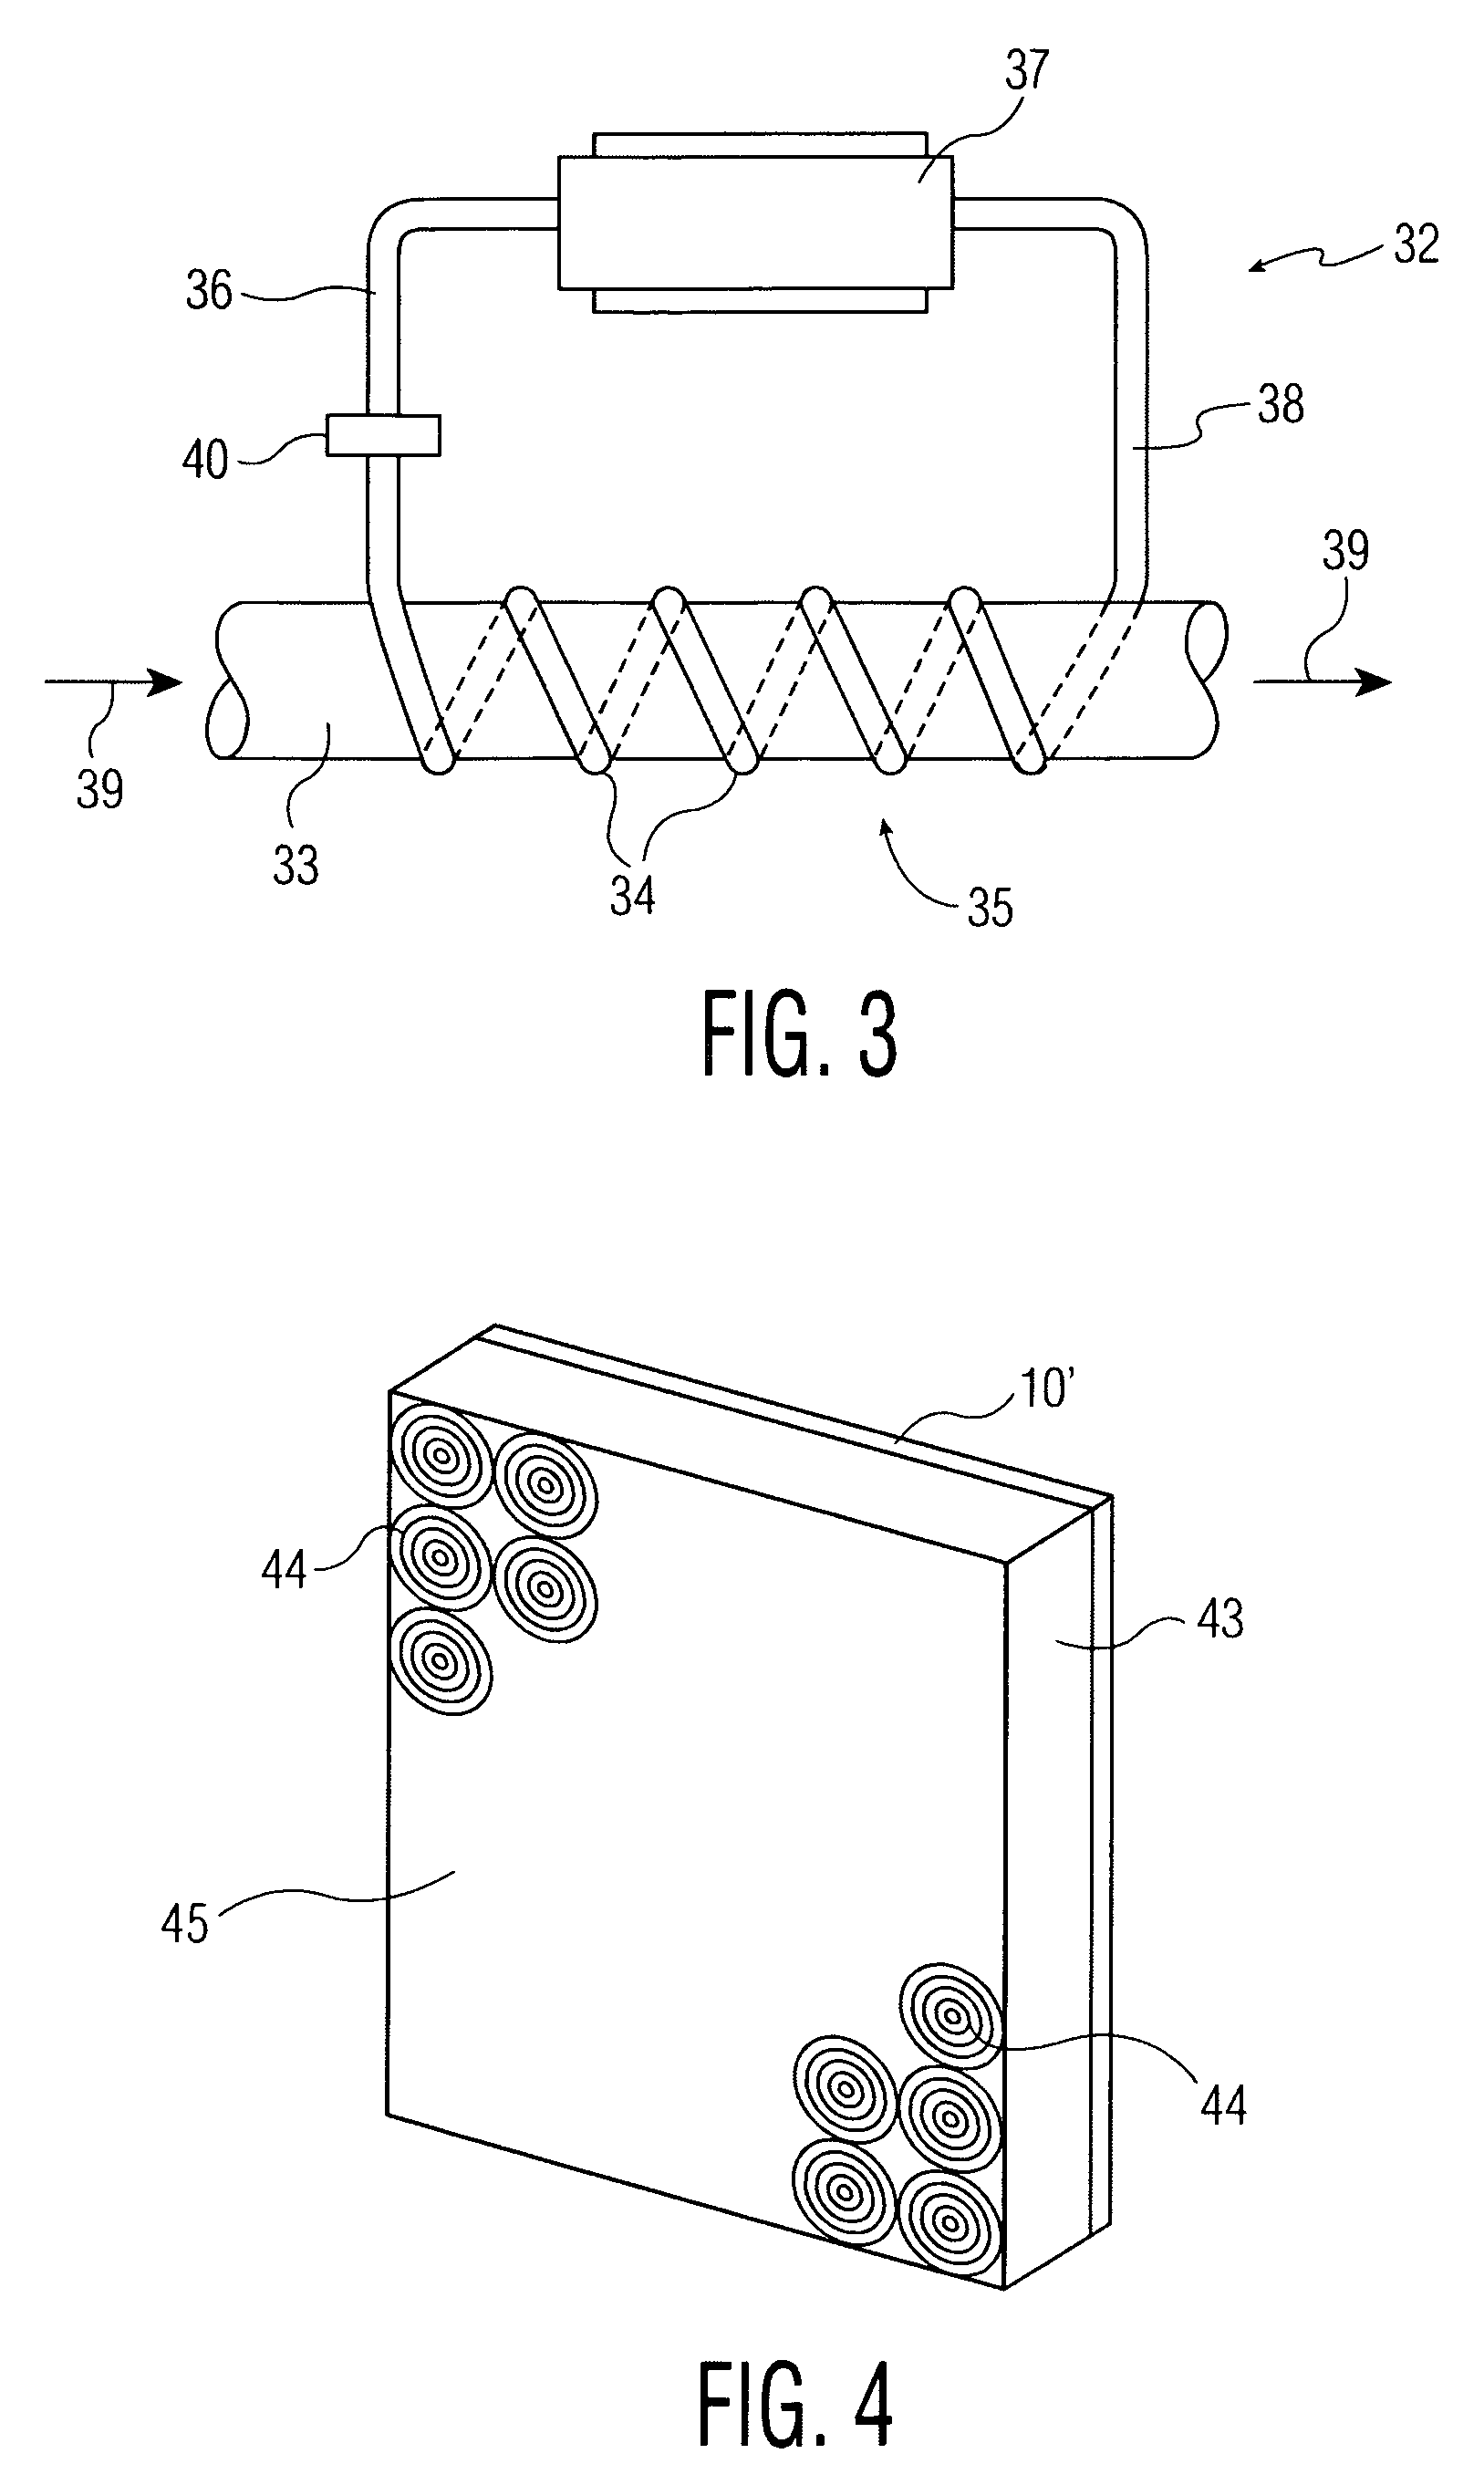 Magnetohydrodynamic energy conversion device using a heat exchanger